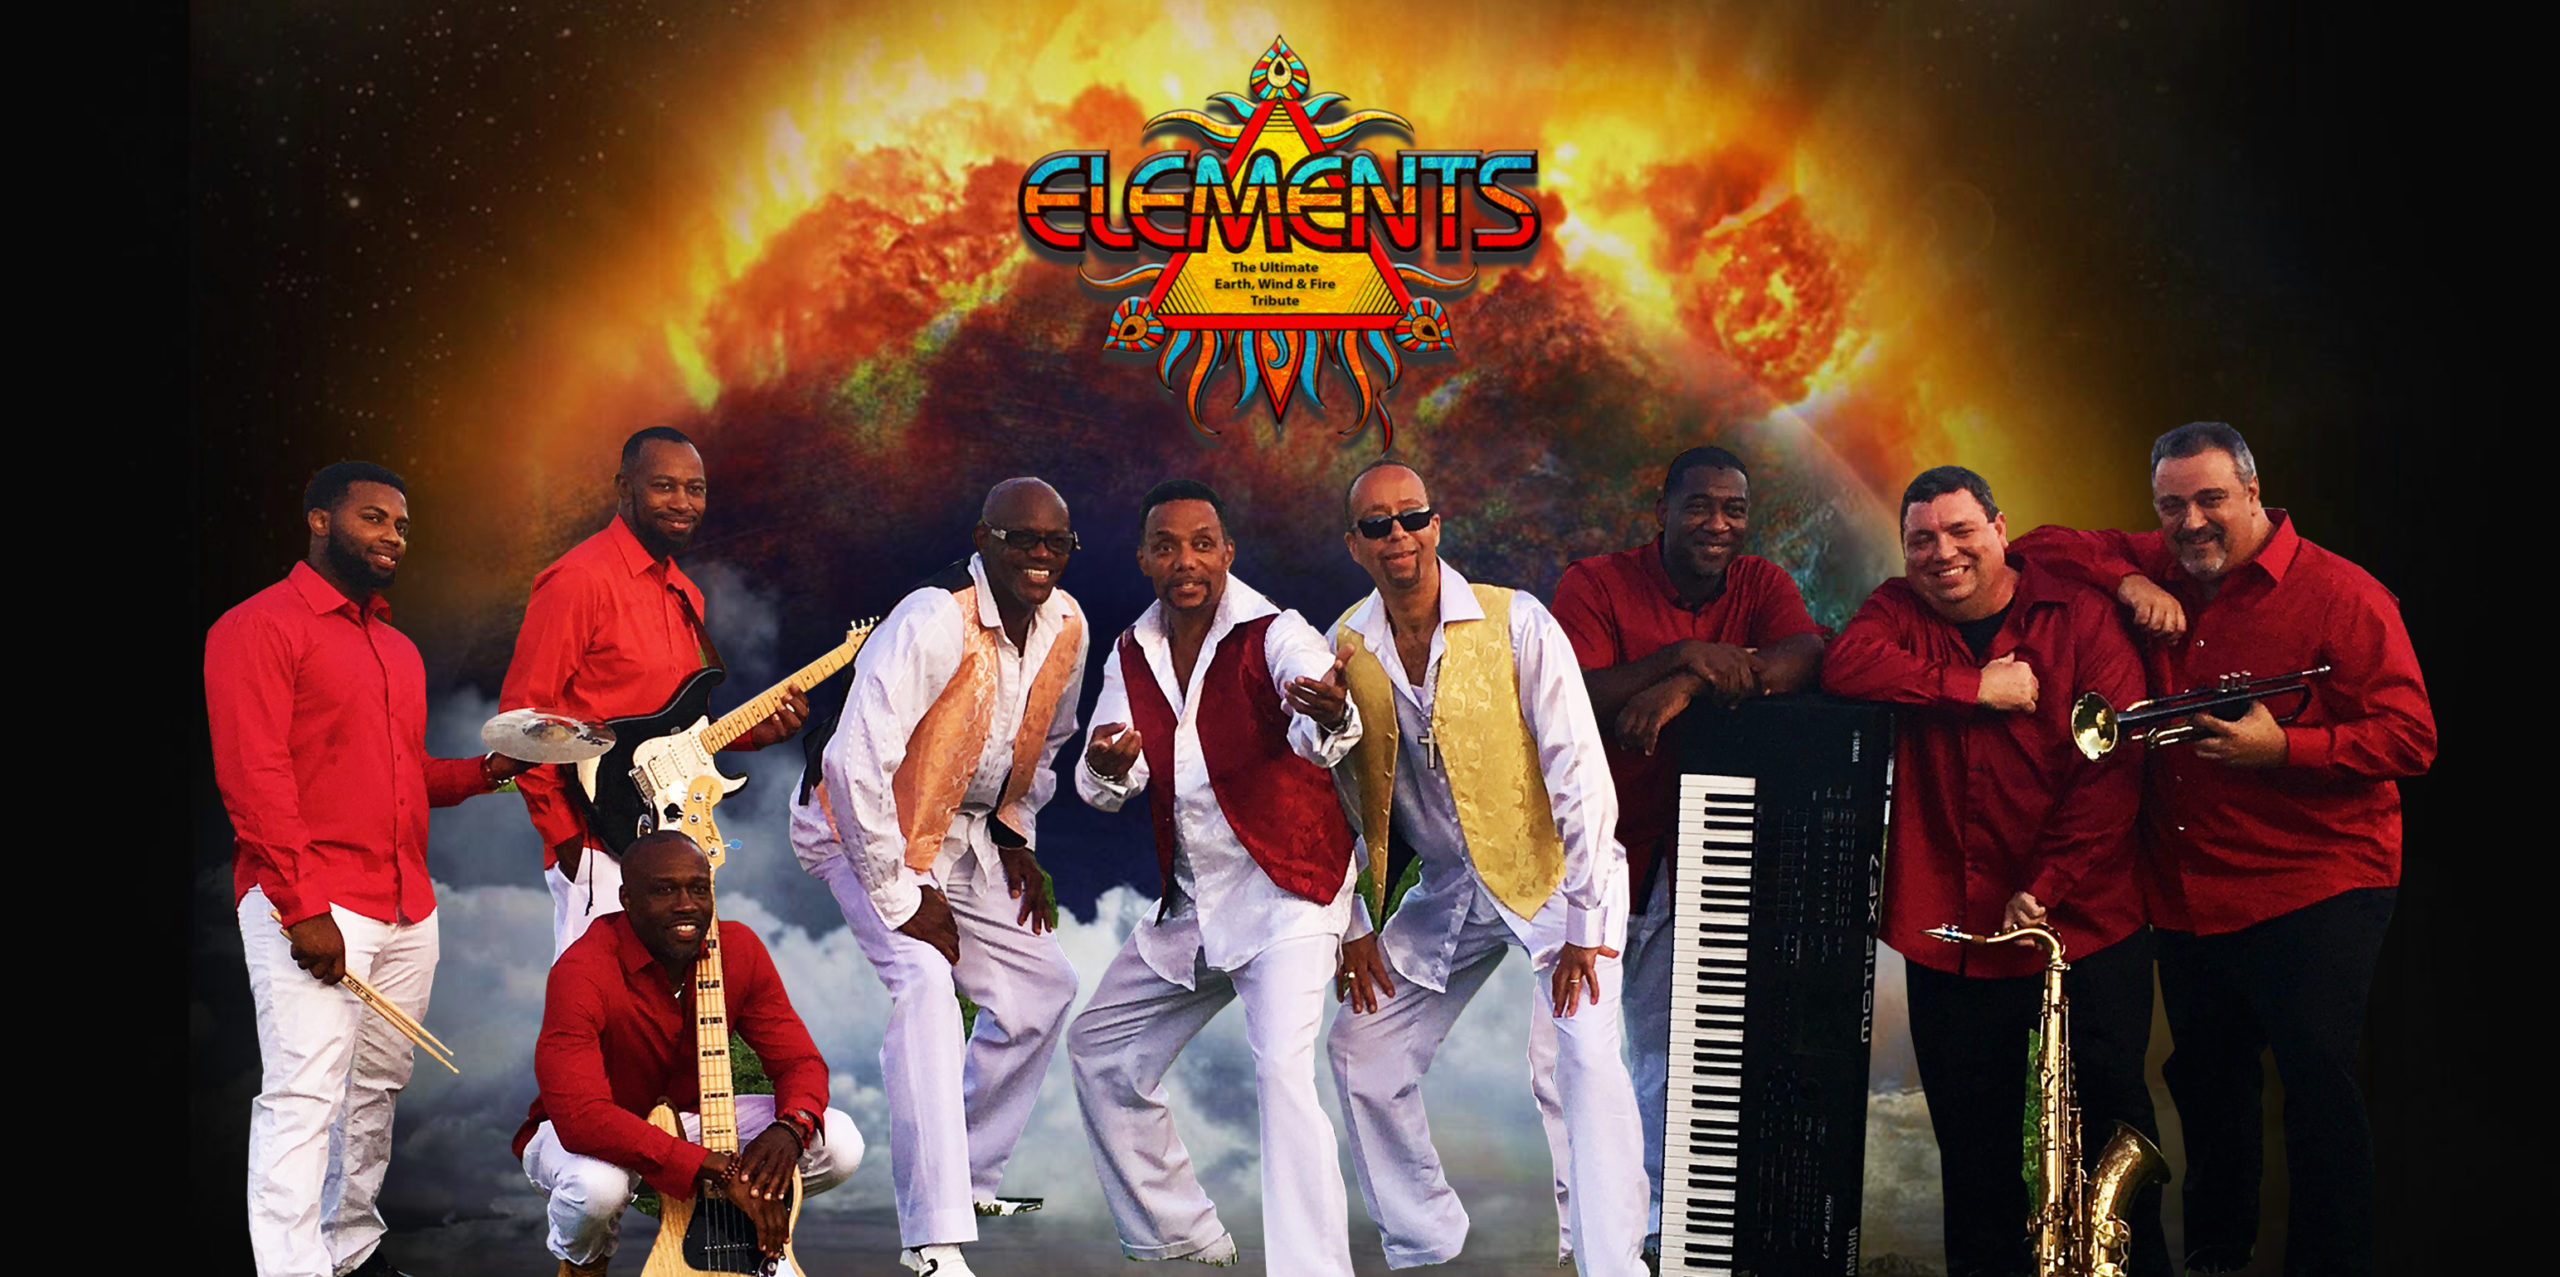 Elements:  The Spirit of Earth, Wind & Fire